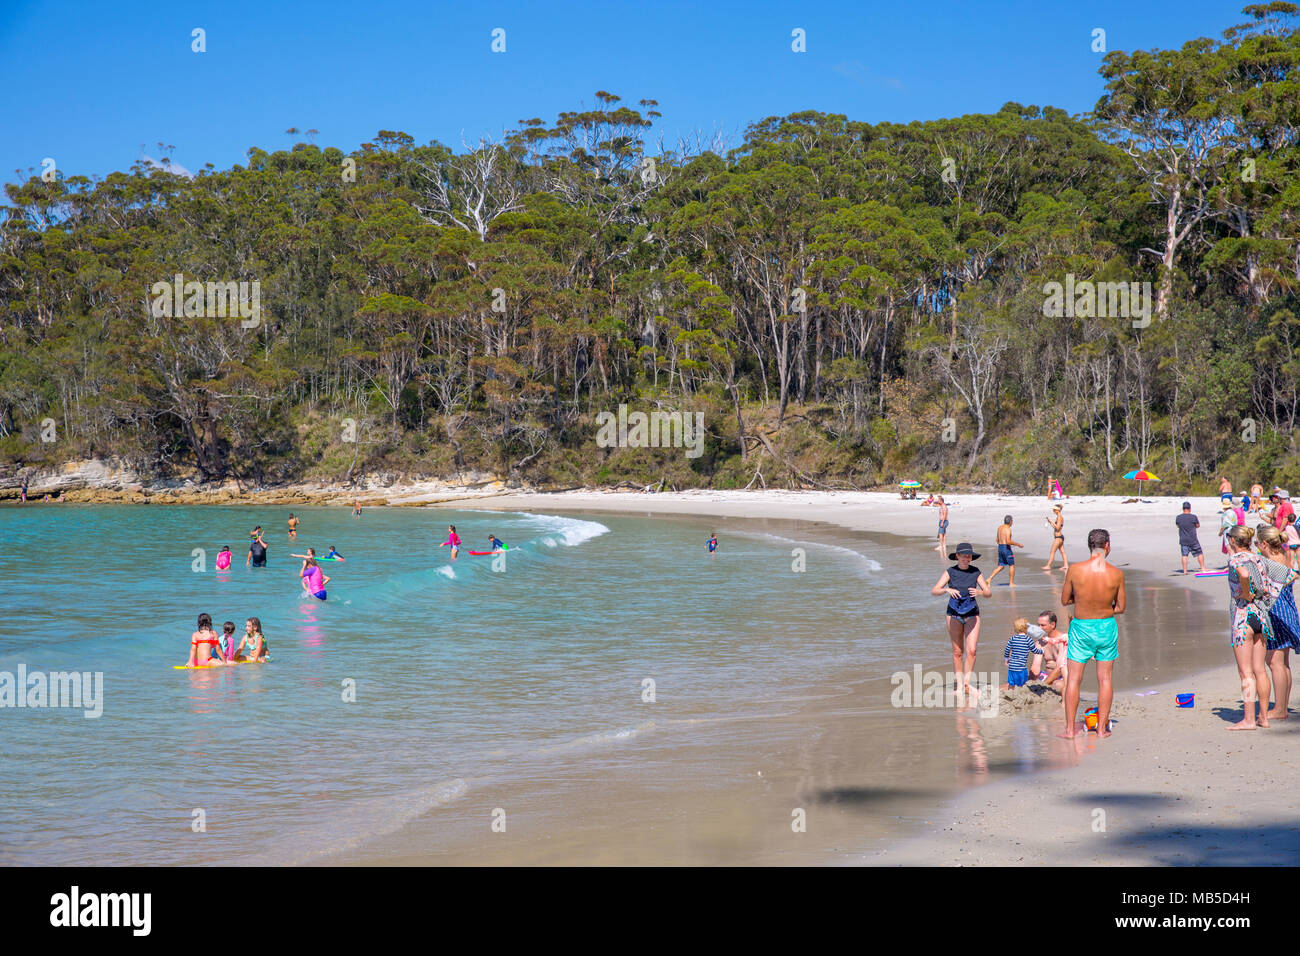 Herbst sonniger Tag am Strand in Blenheim Vincentia, Jervis Bay, New South Wales, Australien Stockfoto